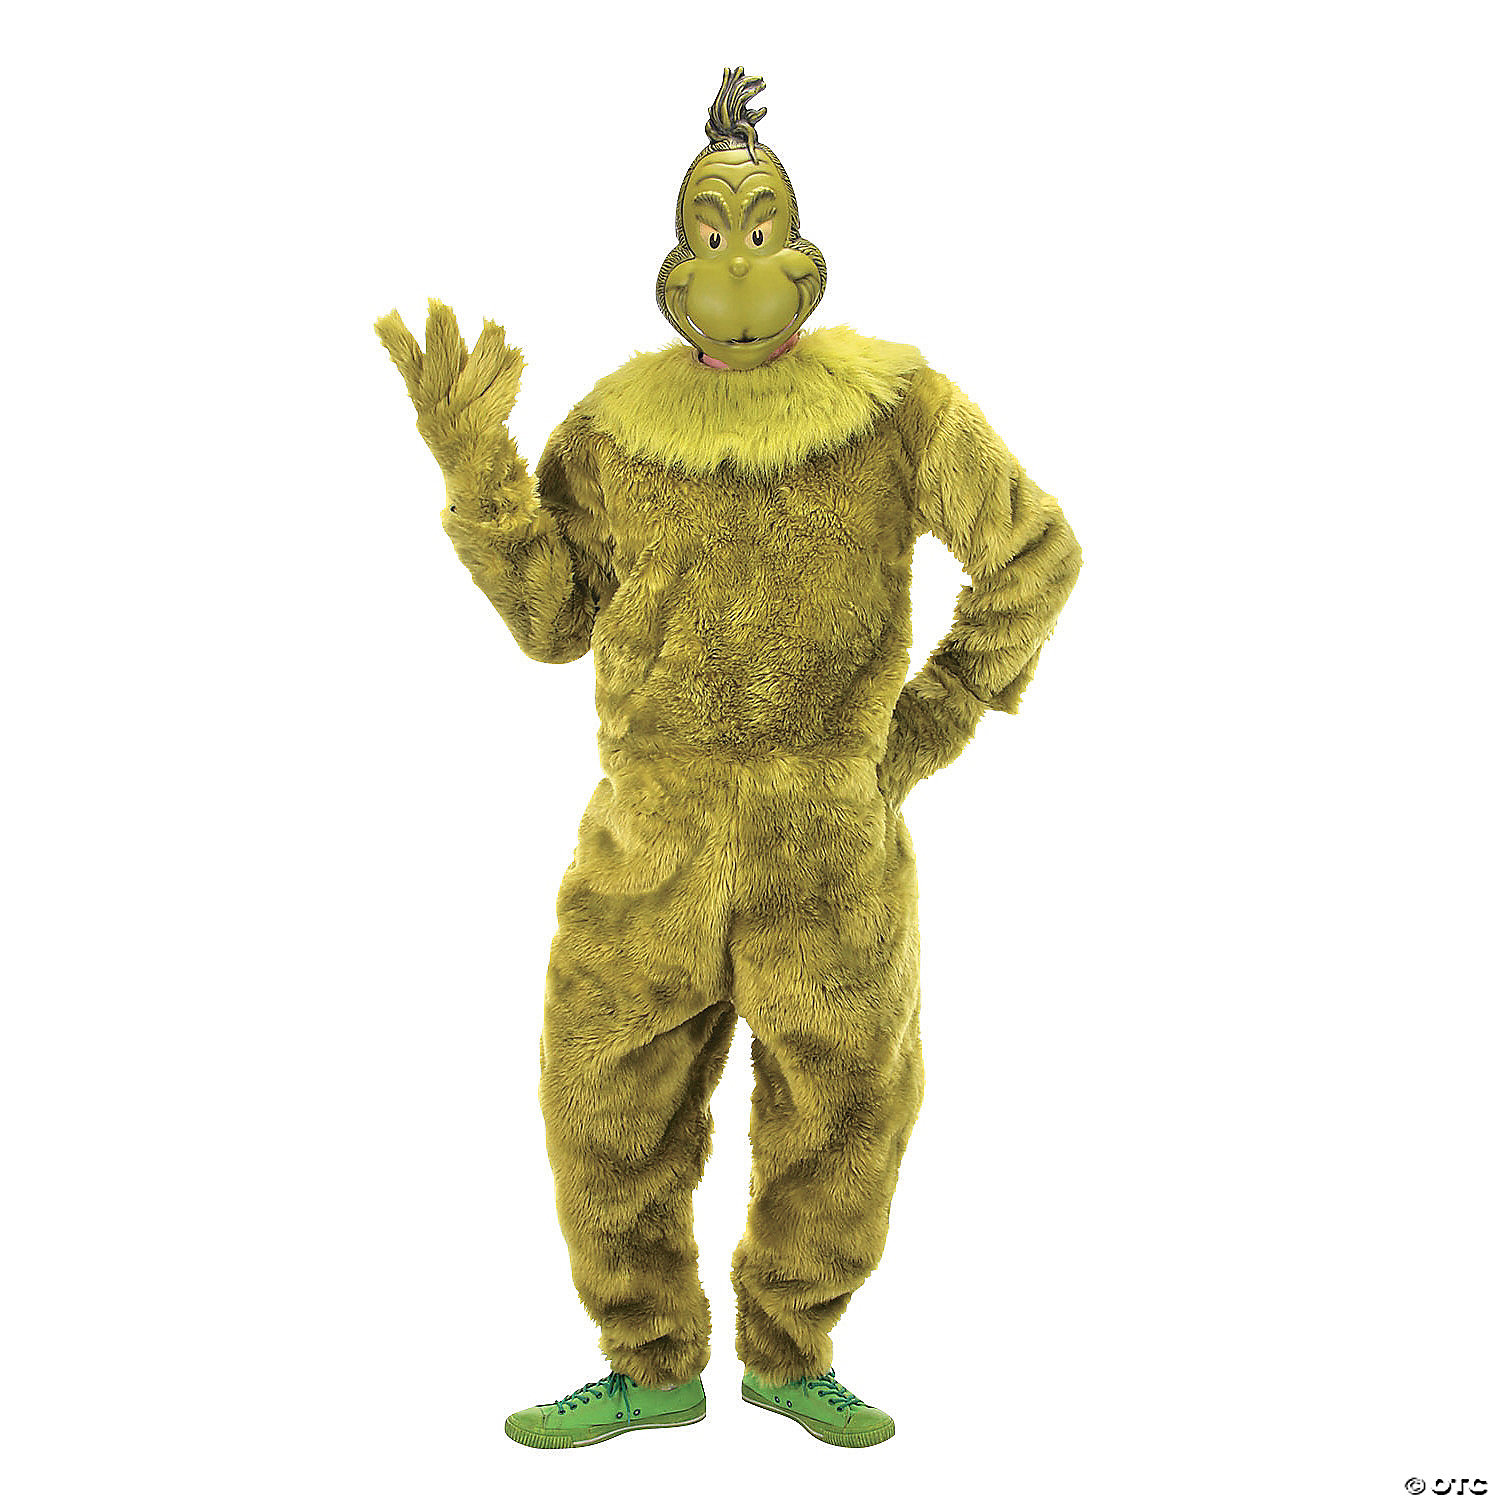 the grinch christmas outfit